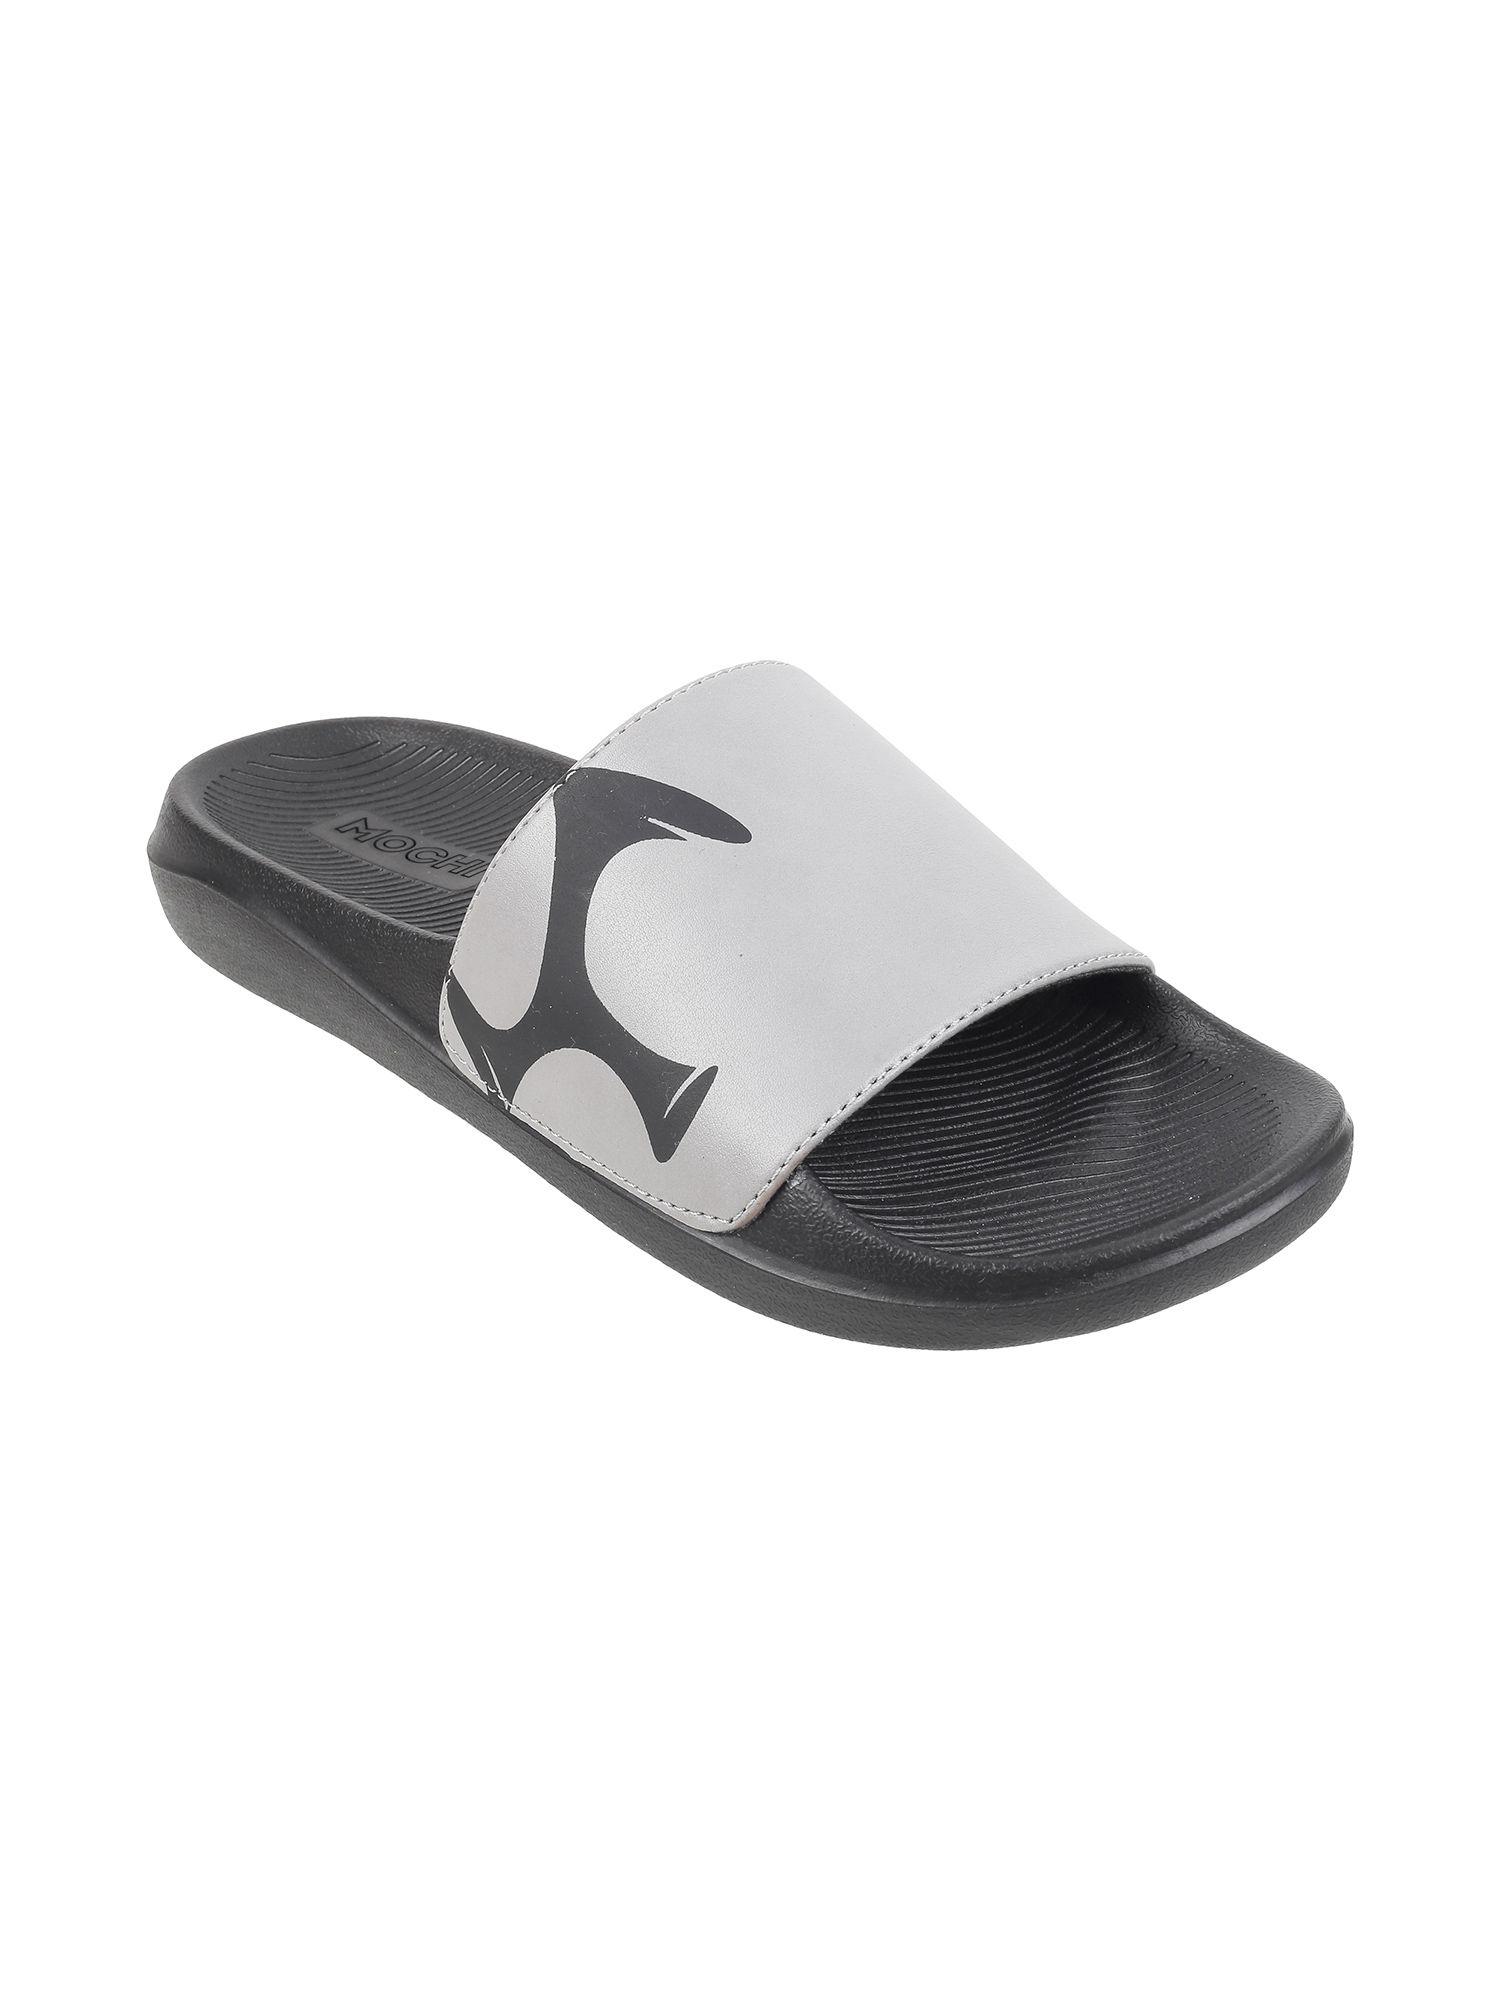 comfortable mens synthetic grey sliders